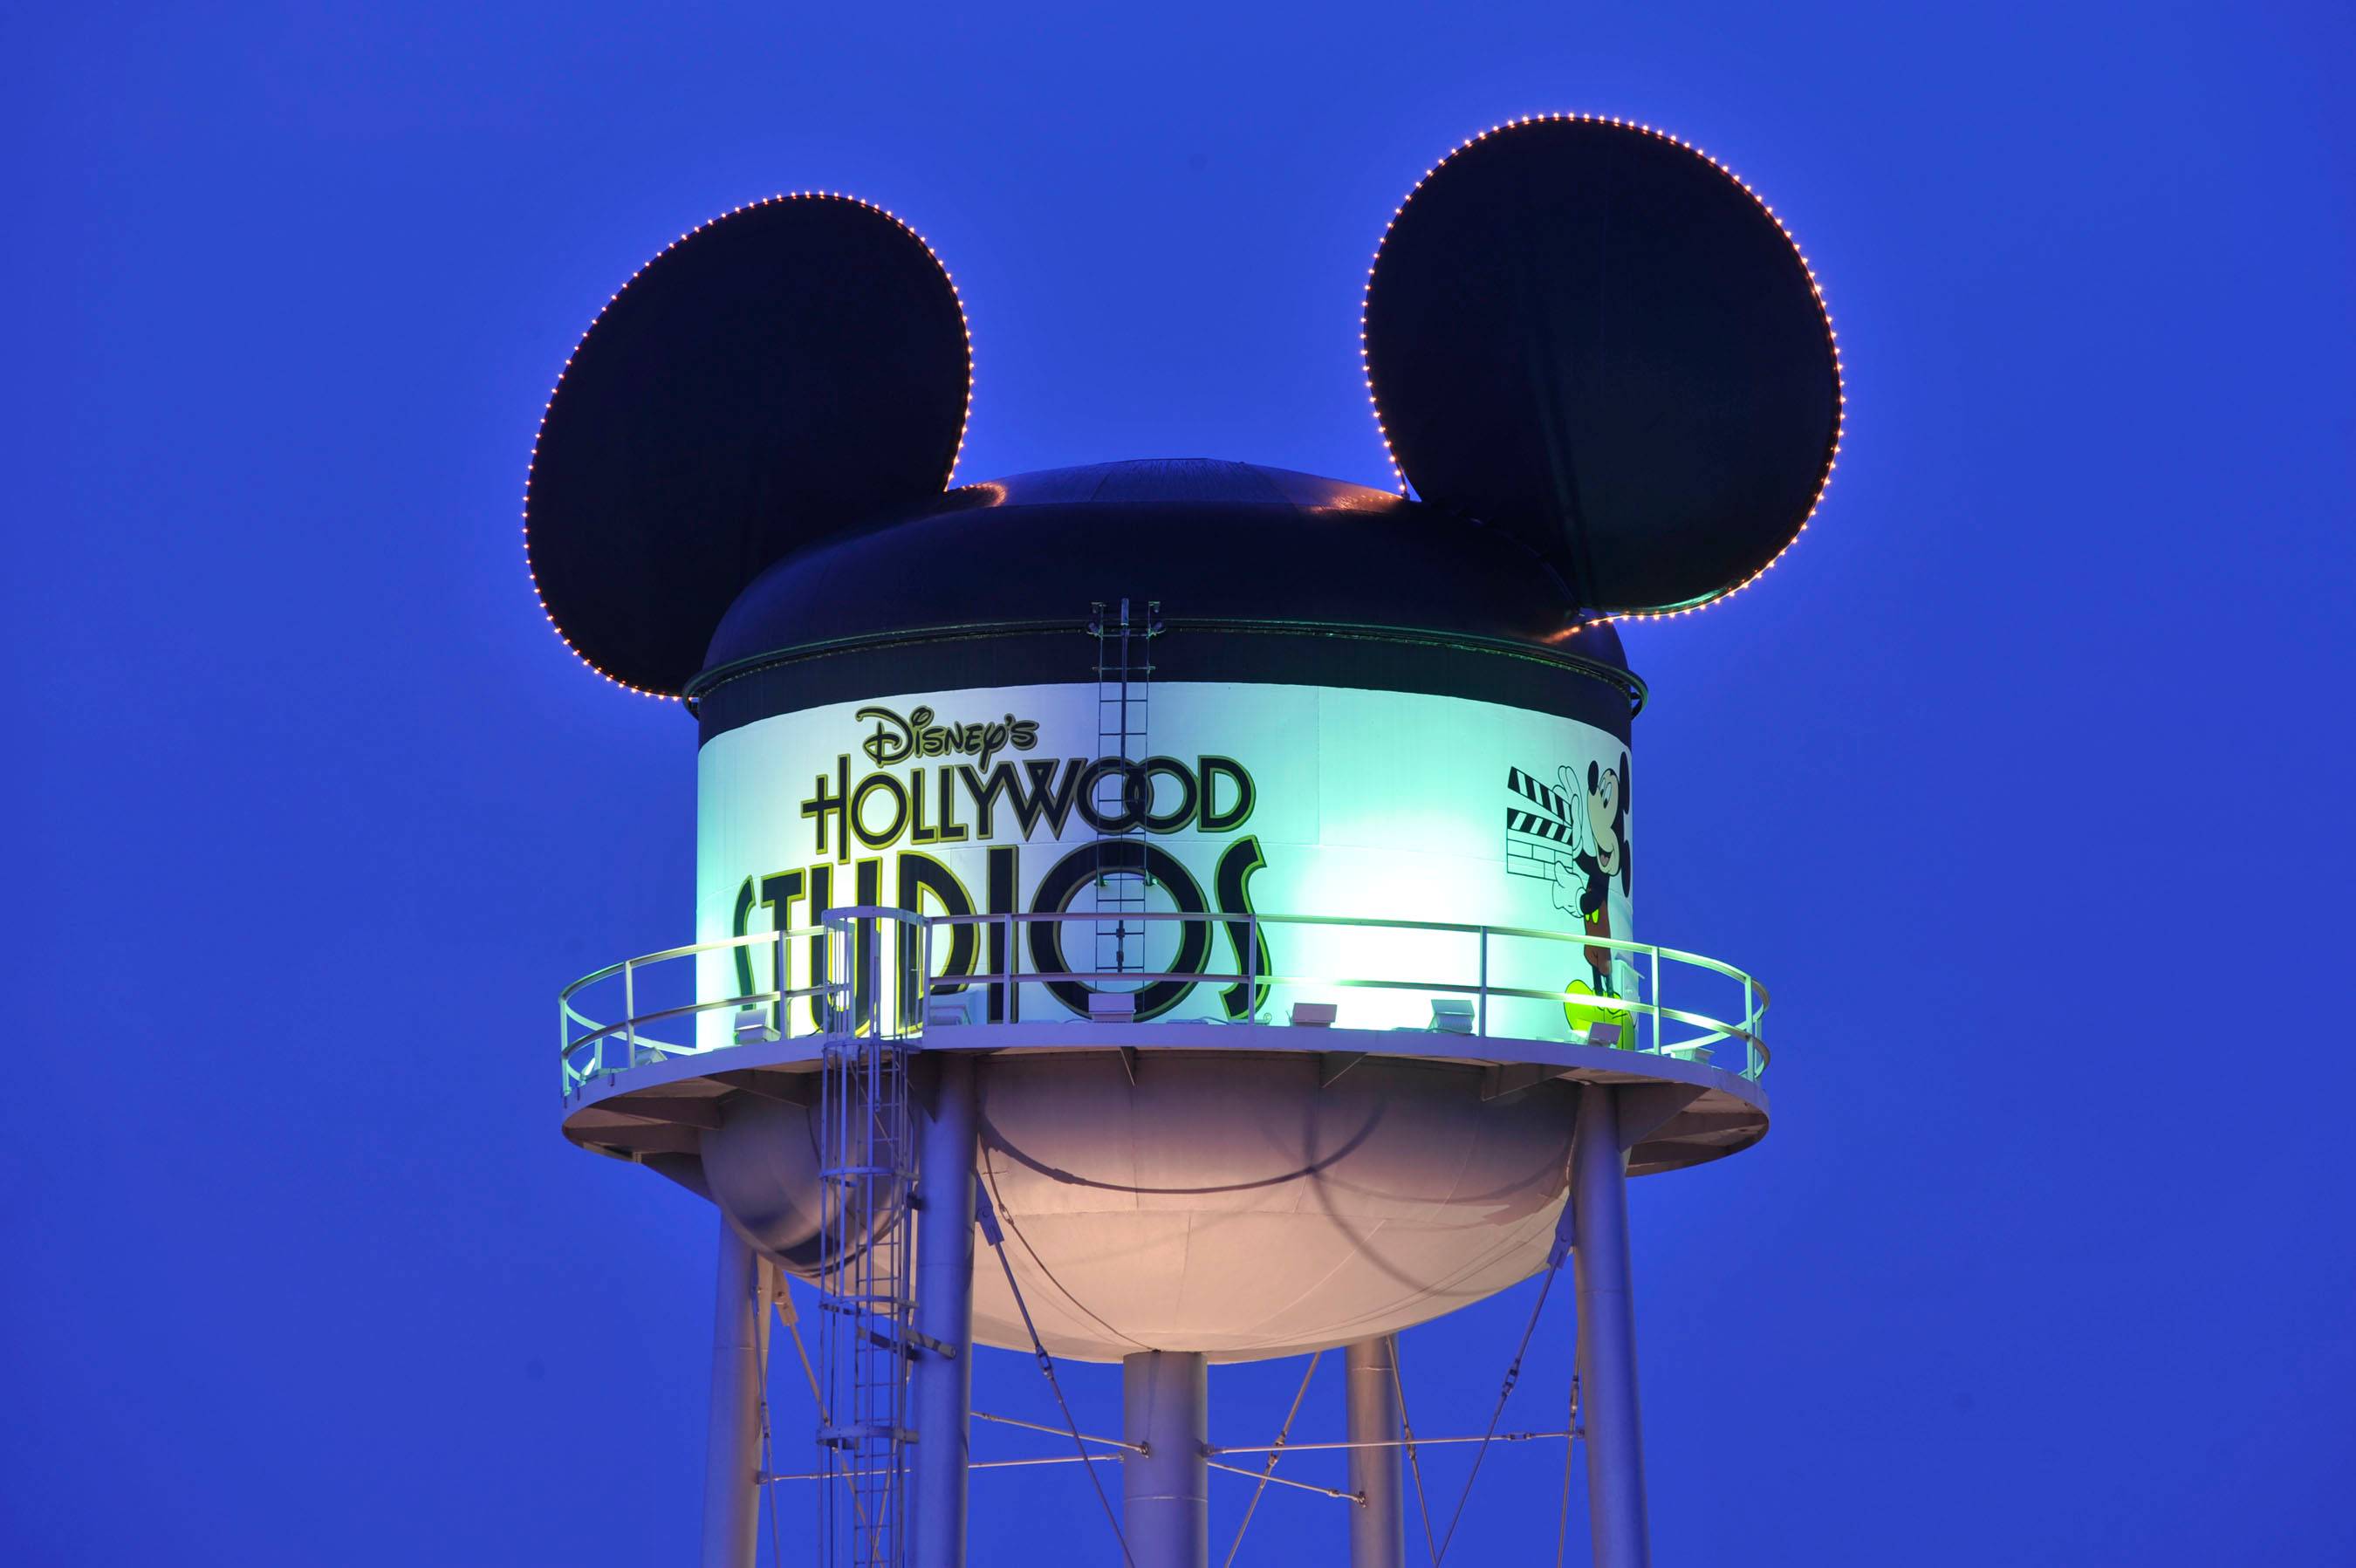 Farewell to the Earffel Tower at Disney's Hollywood Studios